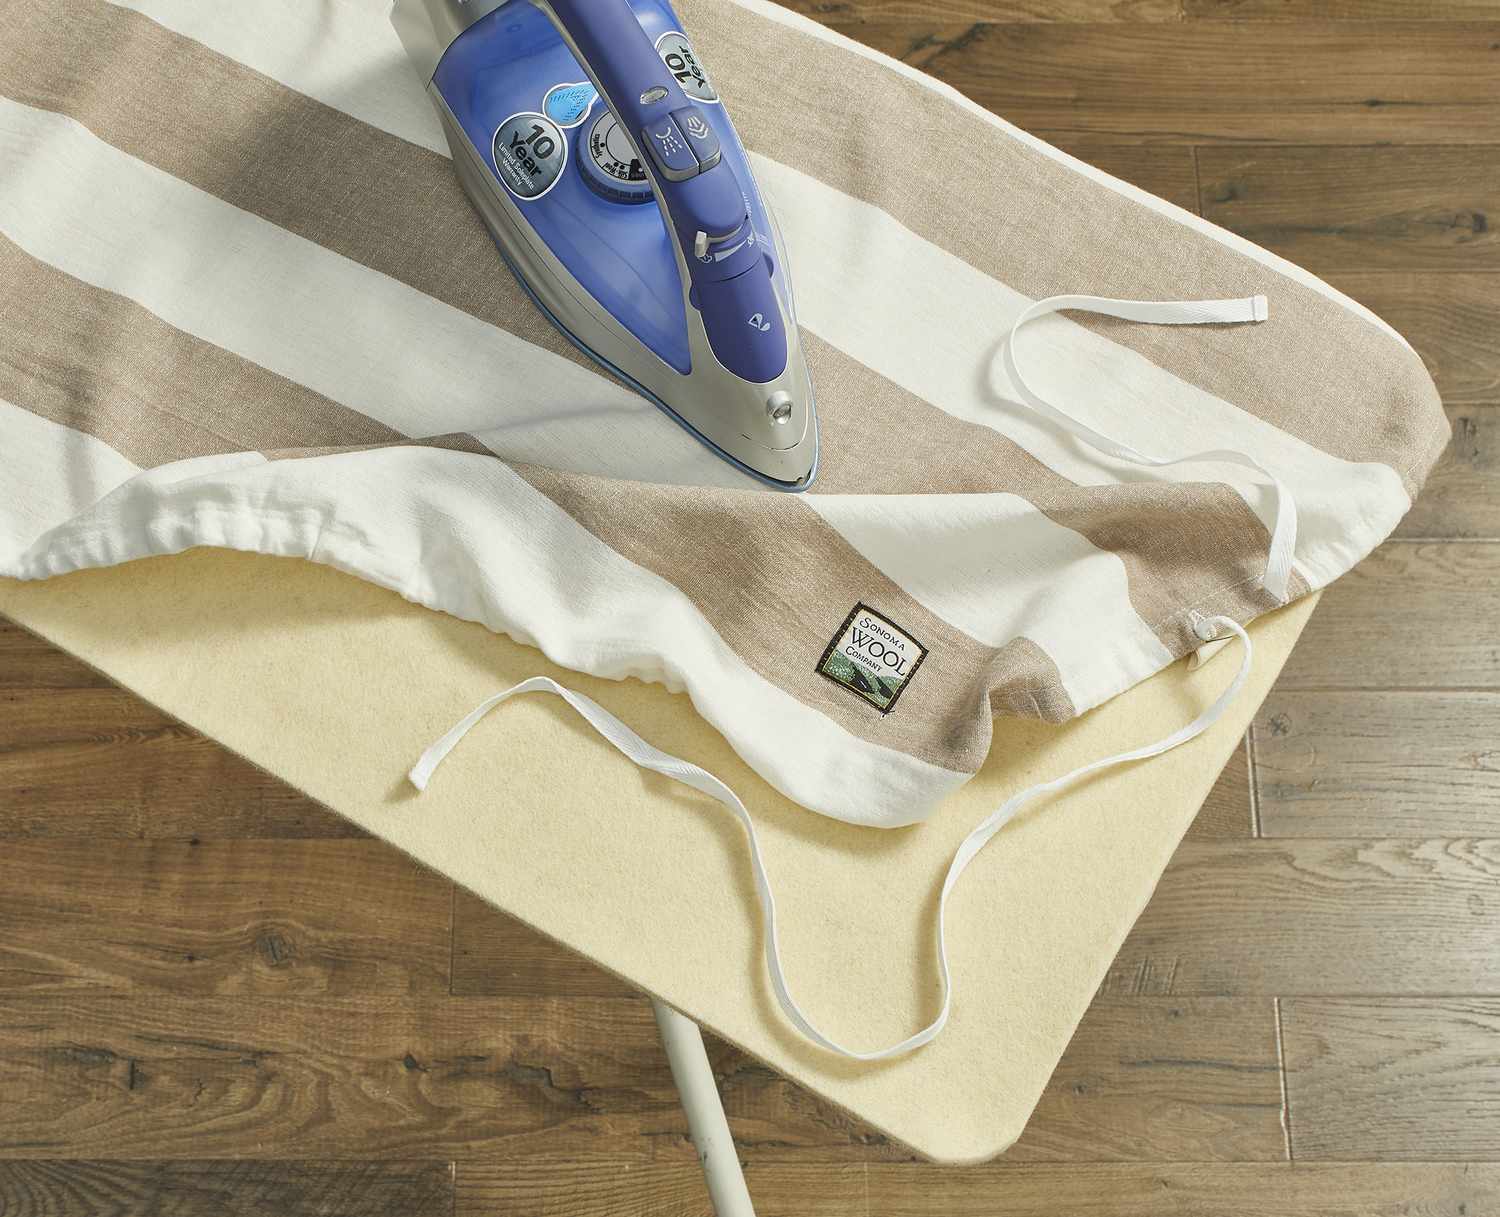 The Wool Ironing Mat: Your New Favorite Notion - Quilting Wemple